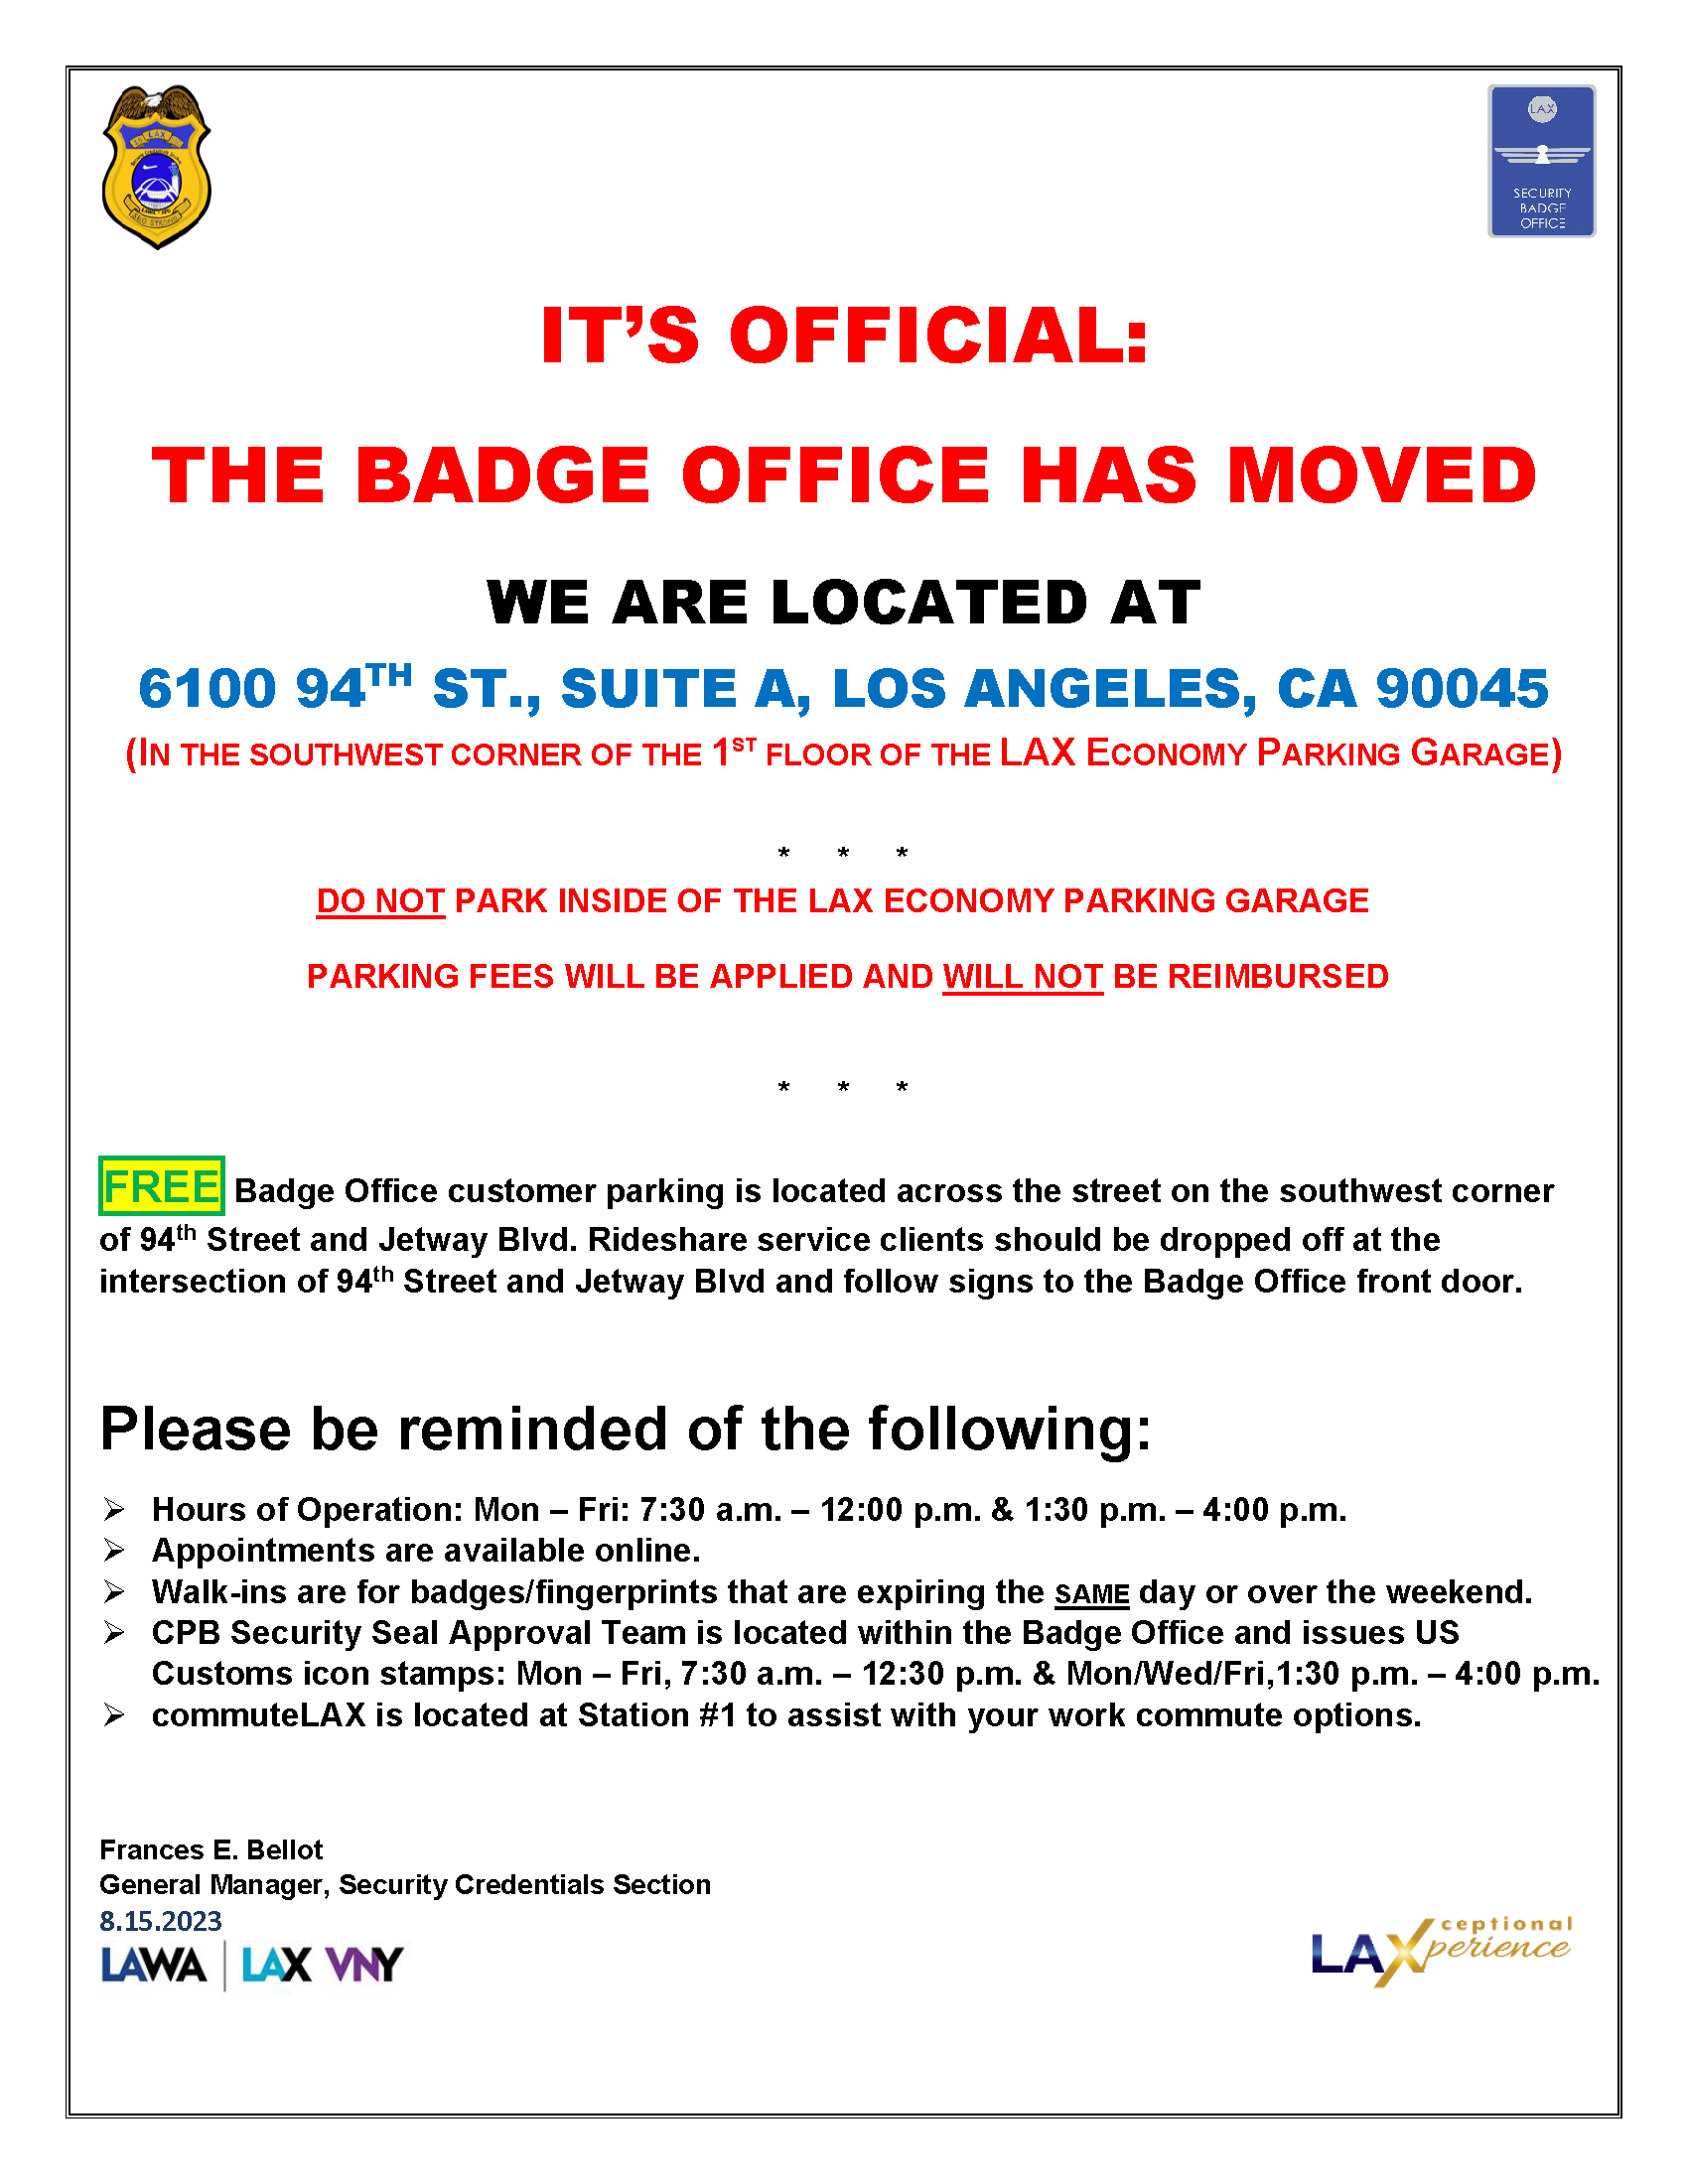 LAWA Badge Office has moved